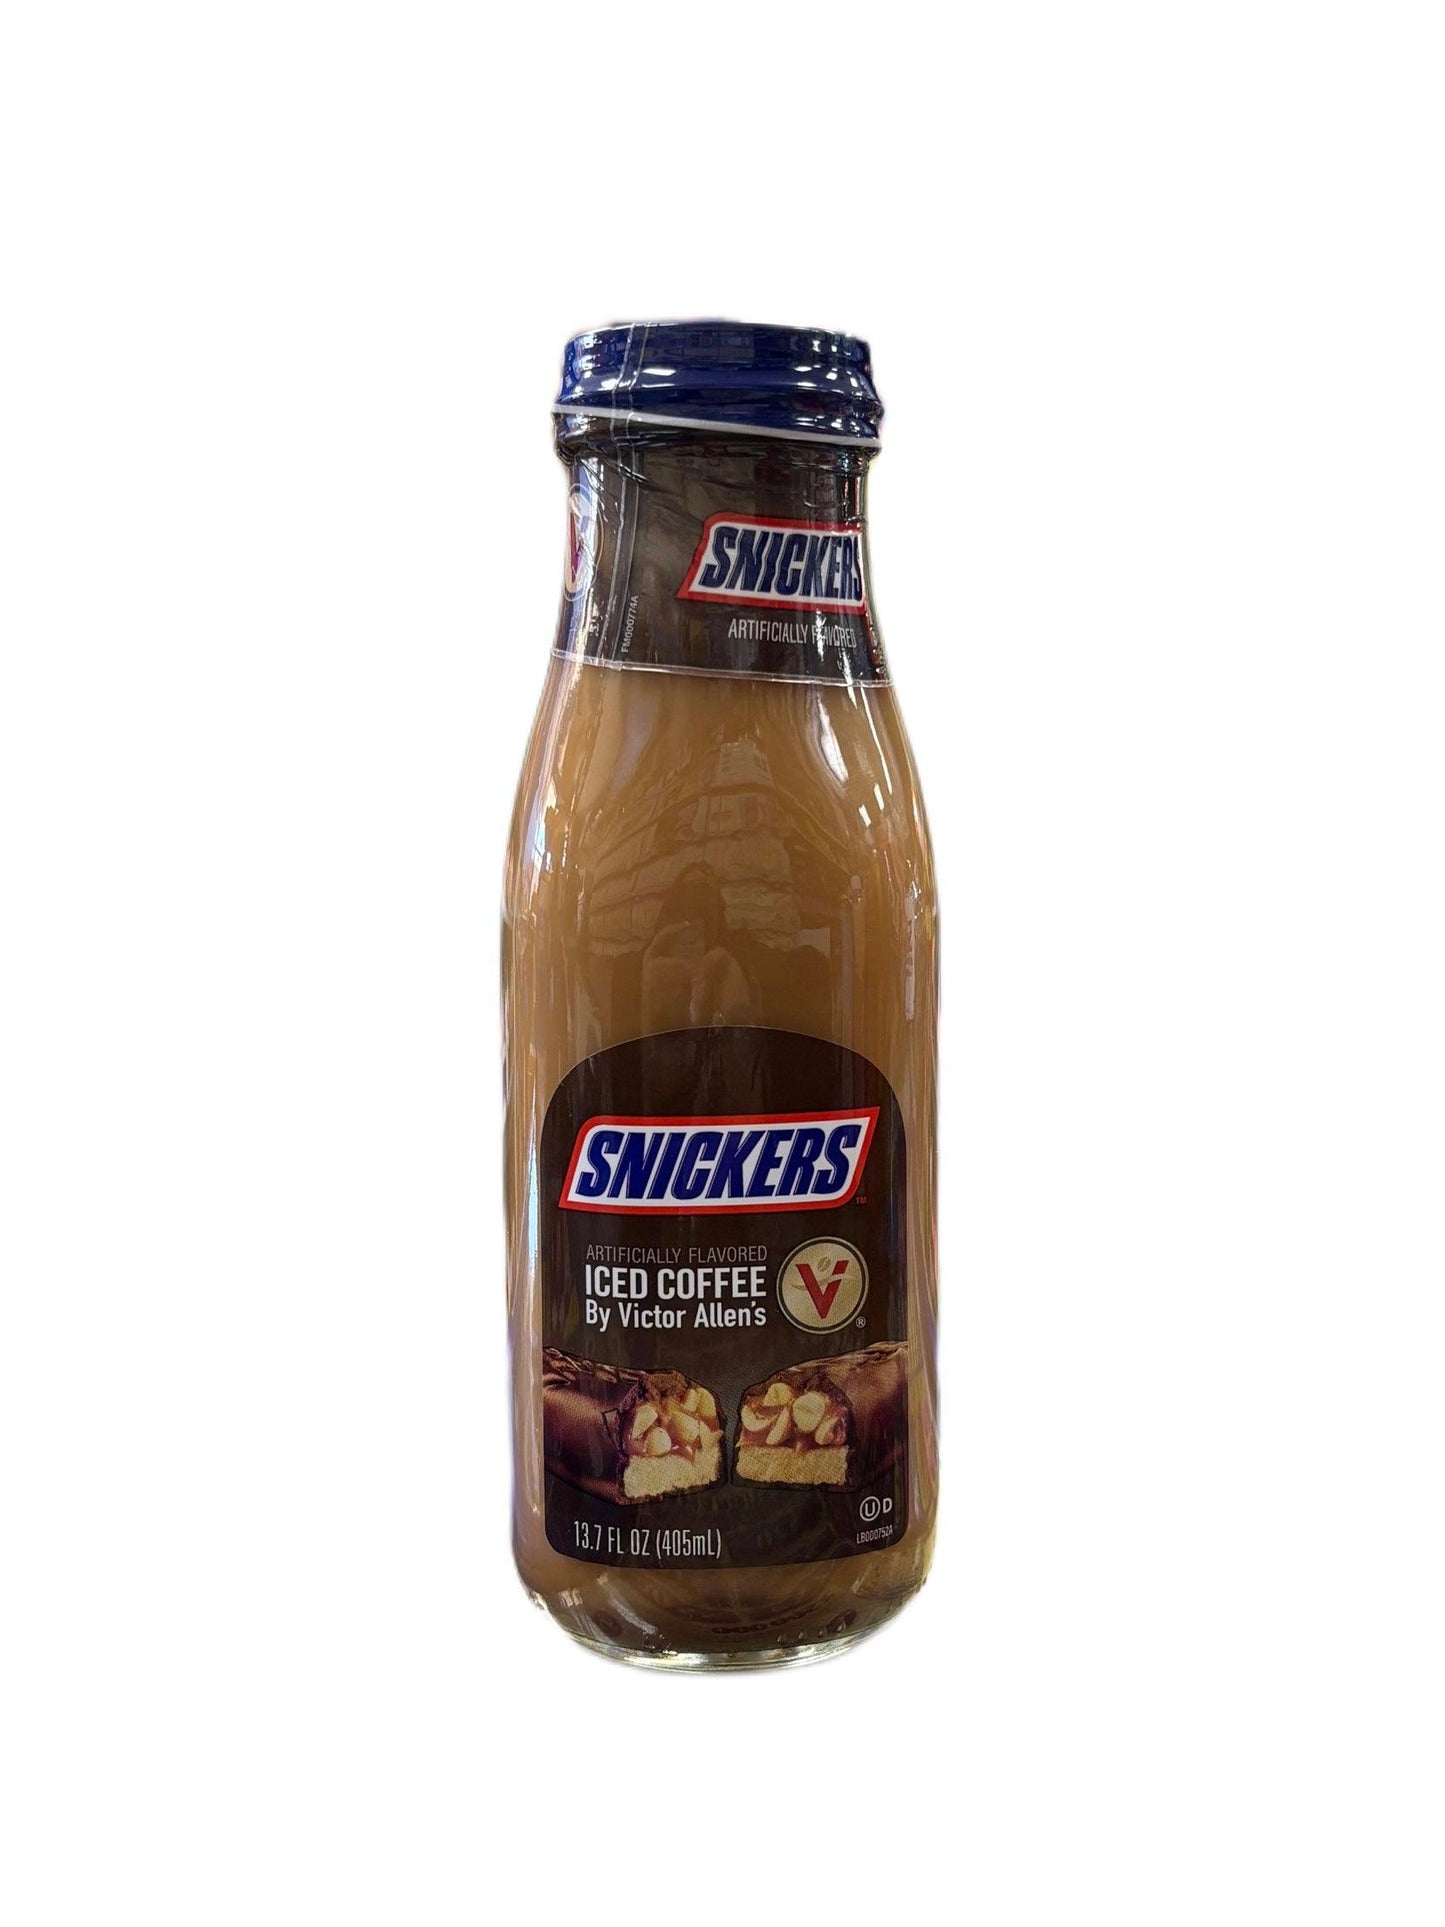 Snickers Iced Coffee Glass Bottle 13.7OZ - Extreme Snacks